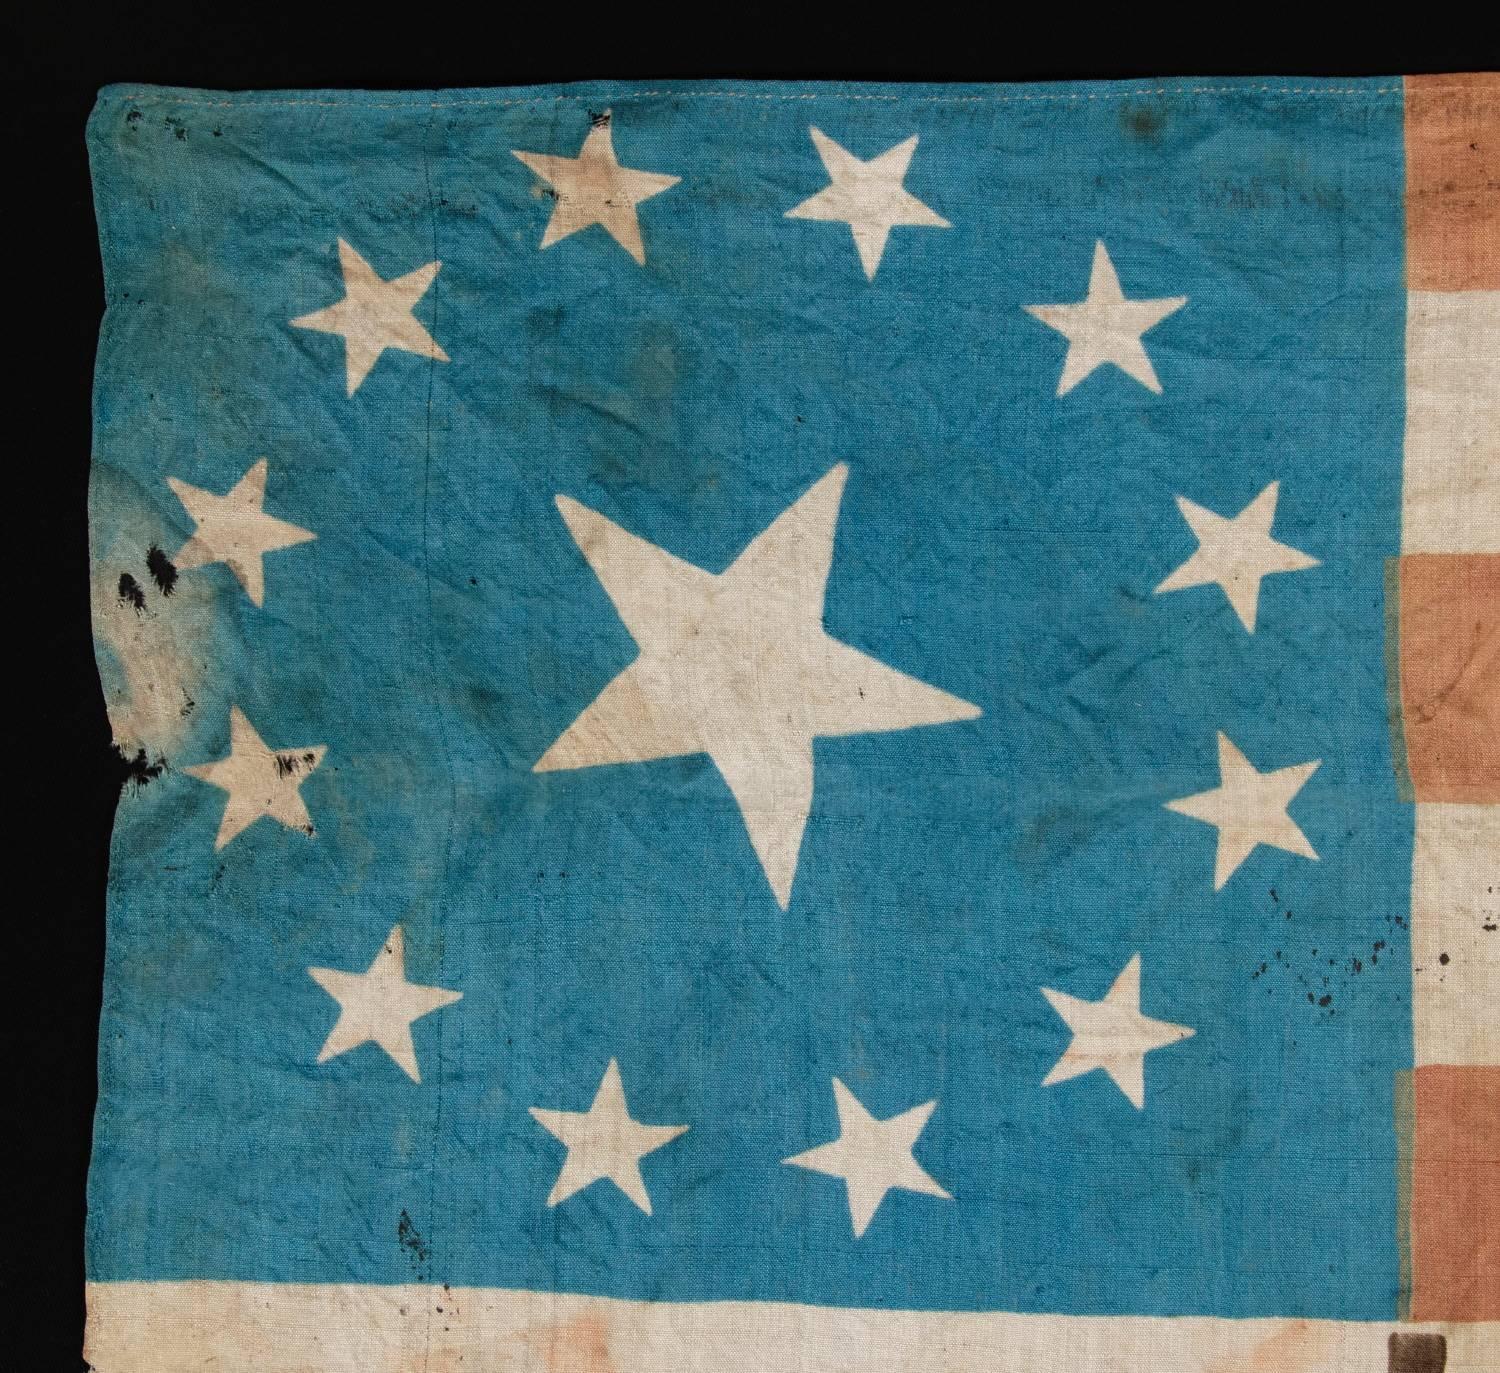 Other One of the Earliest Known Parade Flags, 1840 Campaign of William Henry Harrison